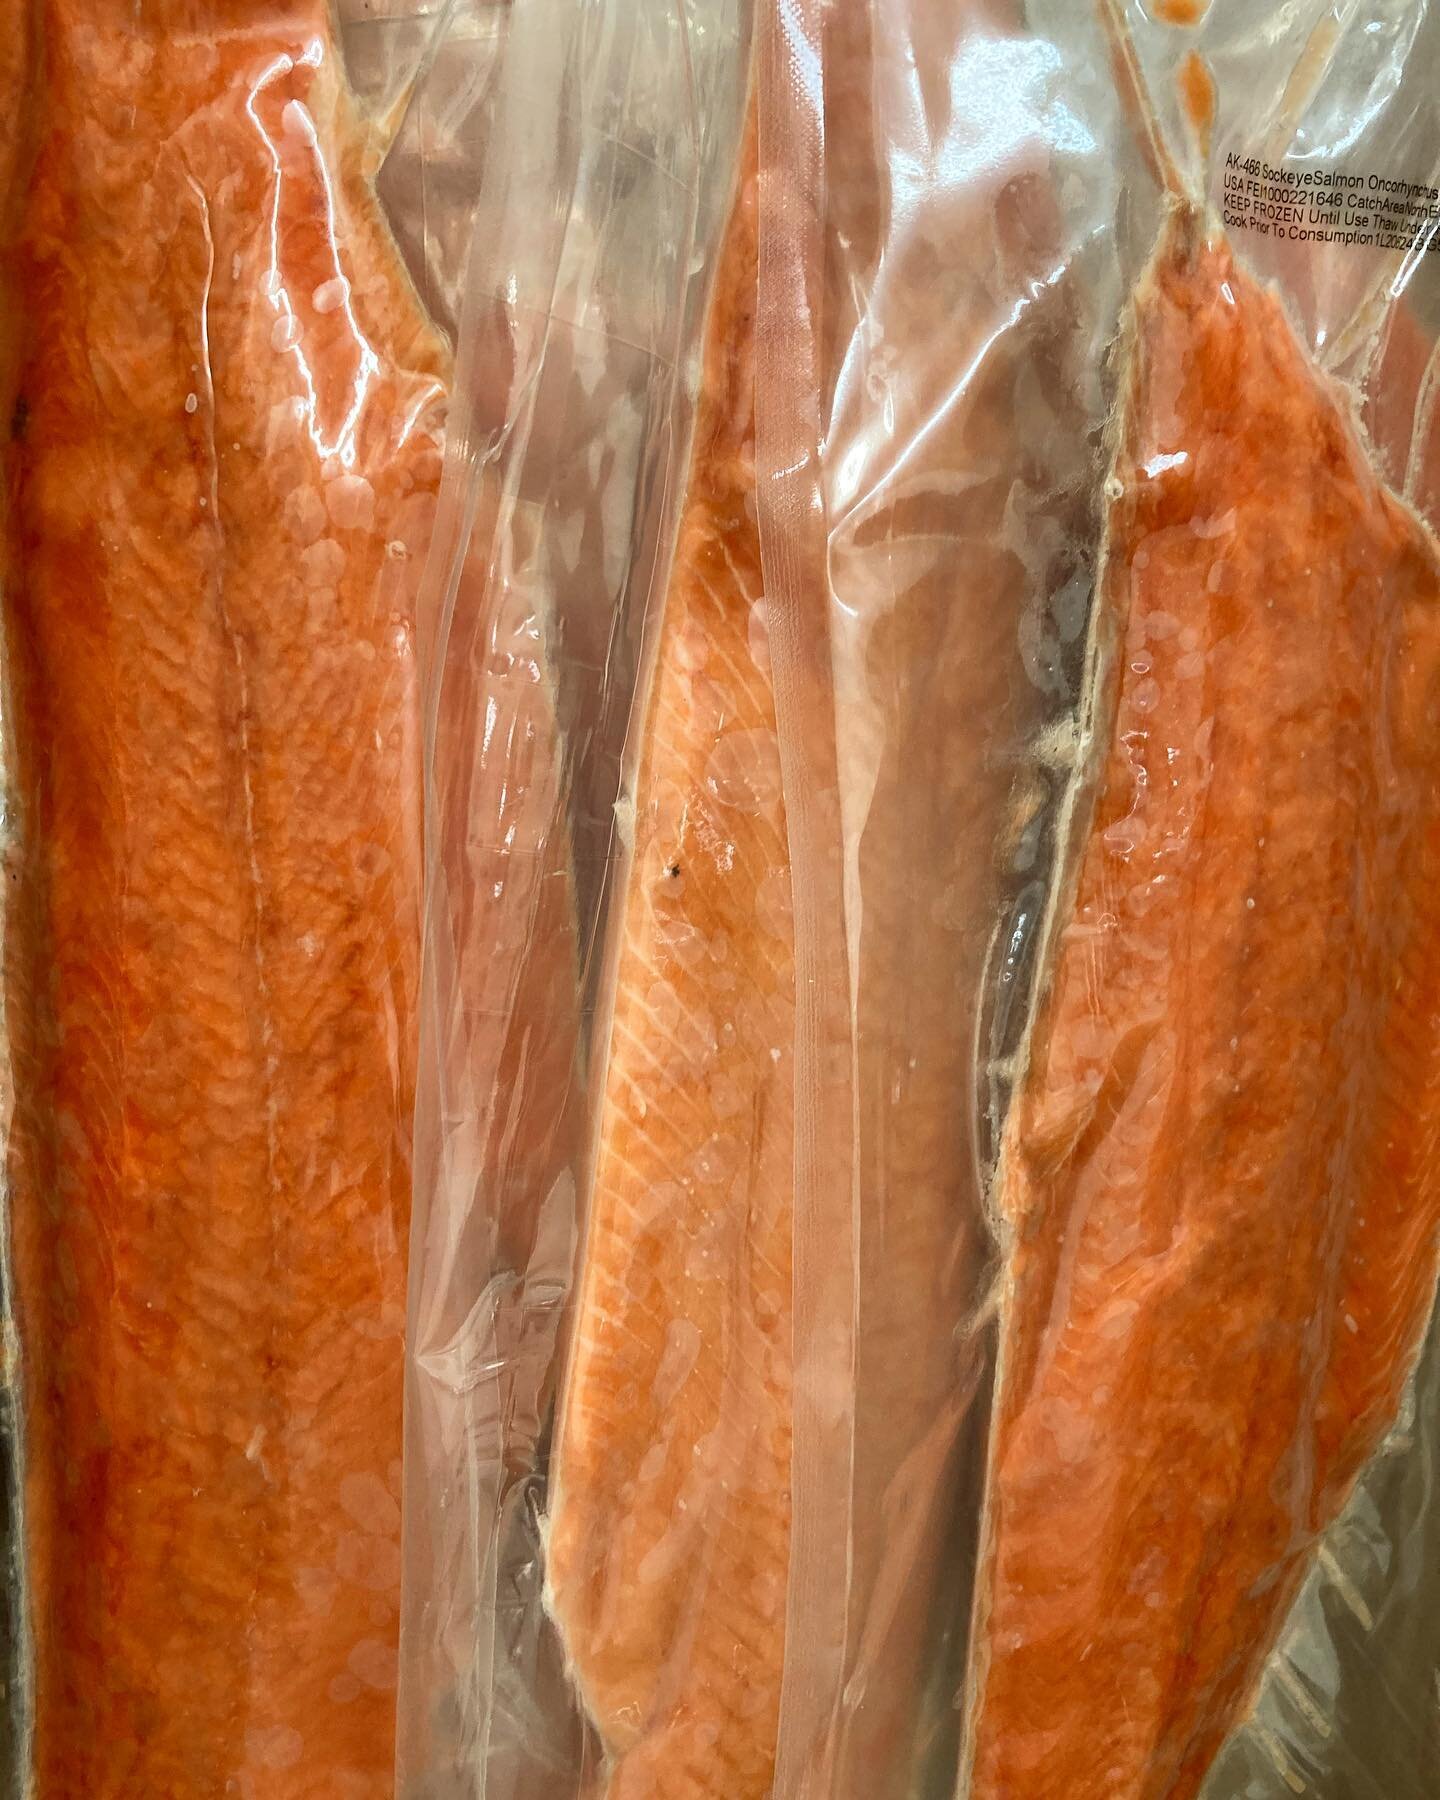 Did you know that you can buy Graveyard Point Fish salmon in both 5 &amp; 10LB bulk increments?

Local fisher-folk &amp; farmers Anna &amp; Joe package their bulk bundles in these sweet natural fiber bags &mdash;  not only do you get a better deal bu